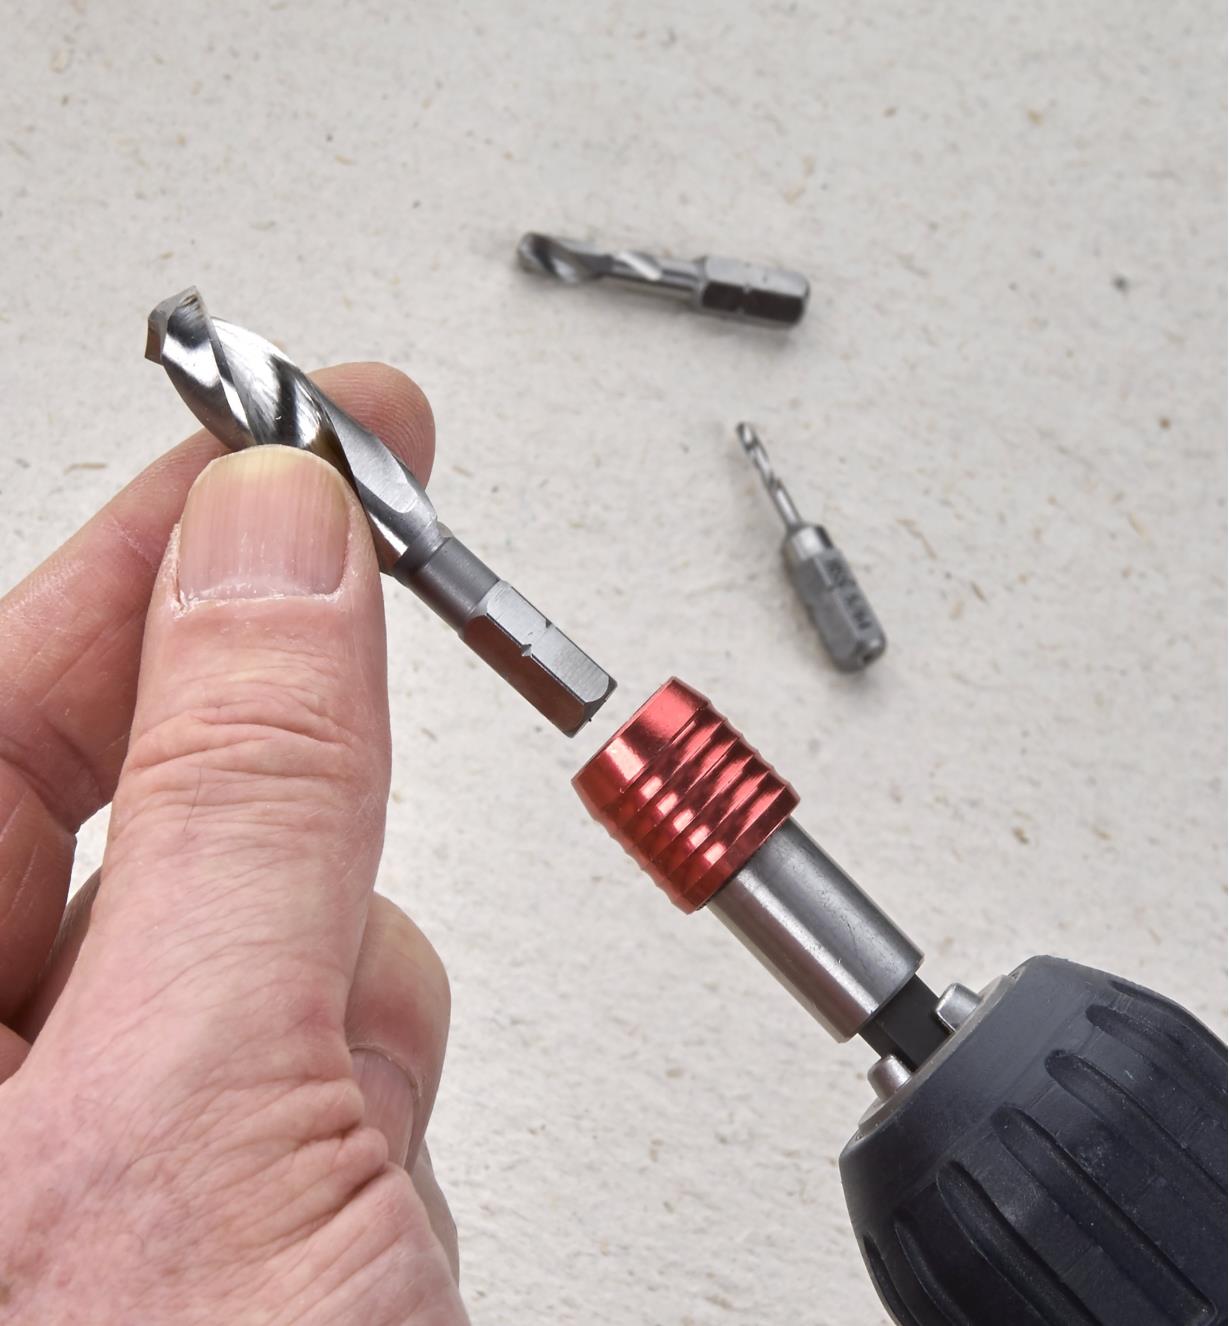 Placing a twist bit into a quick-change bit holder chucked in a drill